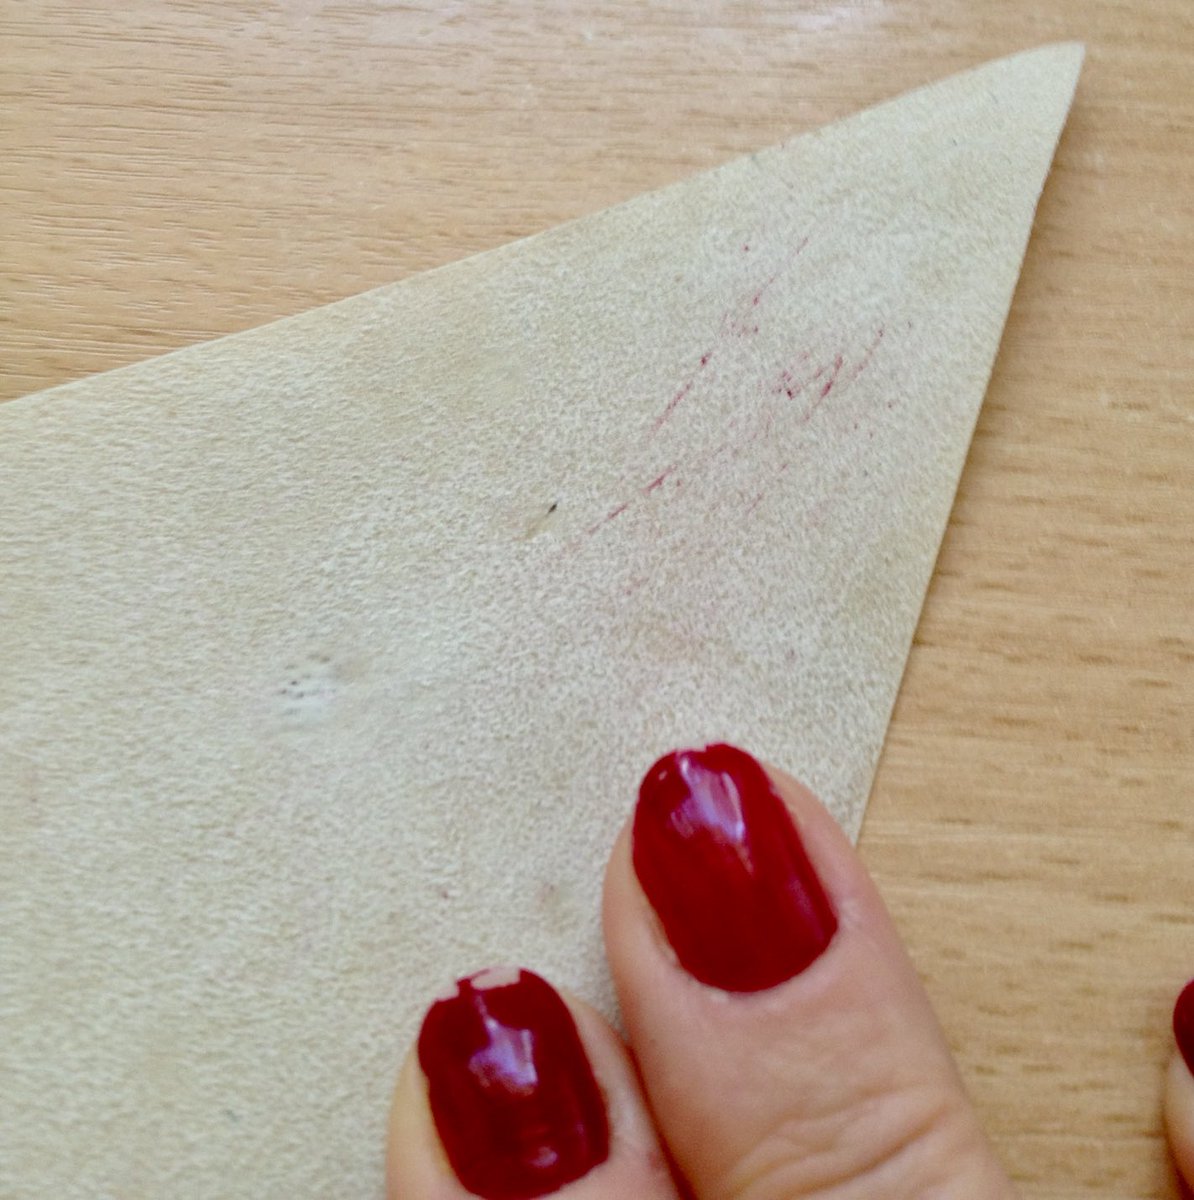 Just in case there’s any doubt, never wear nail varnish when looking at manuscripts,